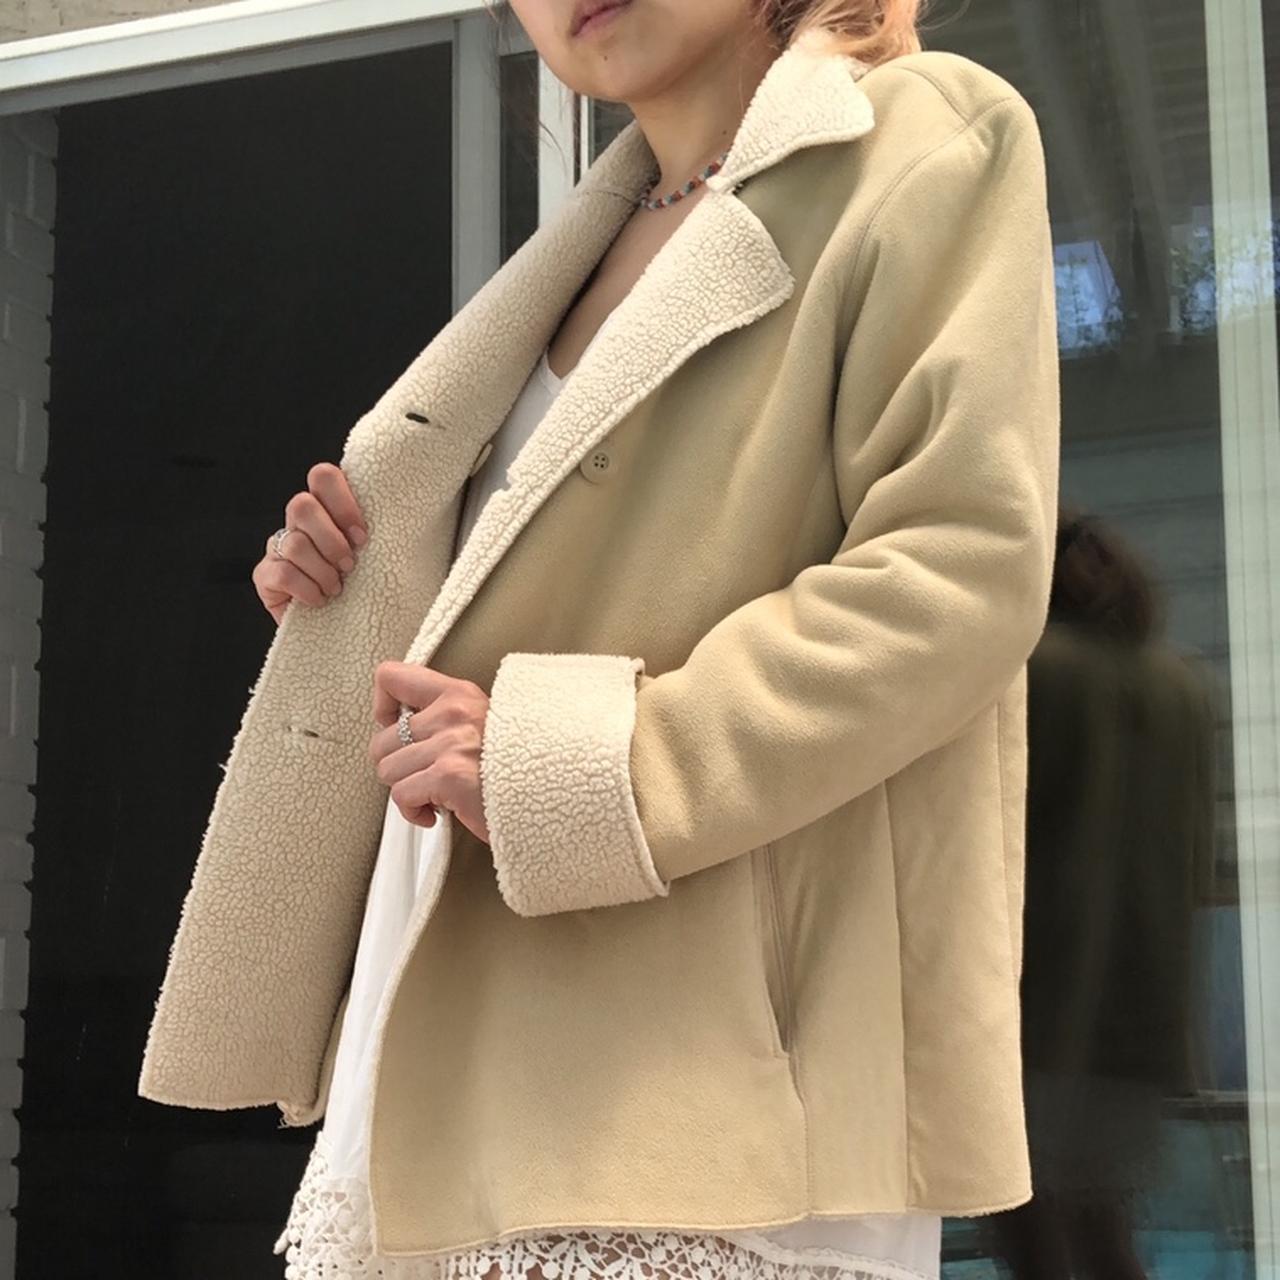 Urban Outfitters Women's Tan and Cream Coat (4)